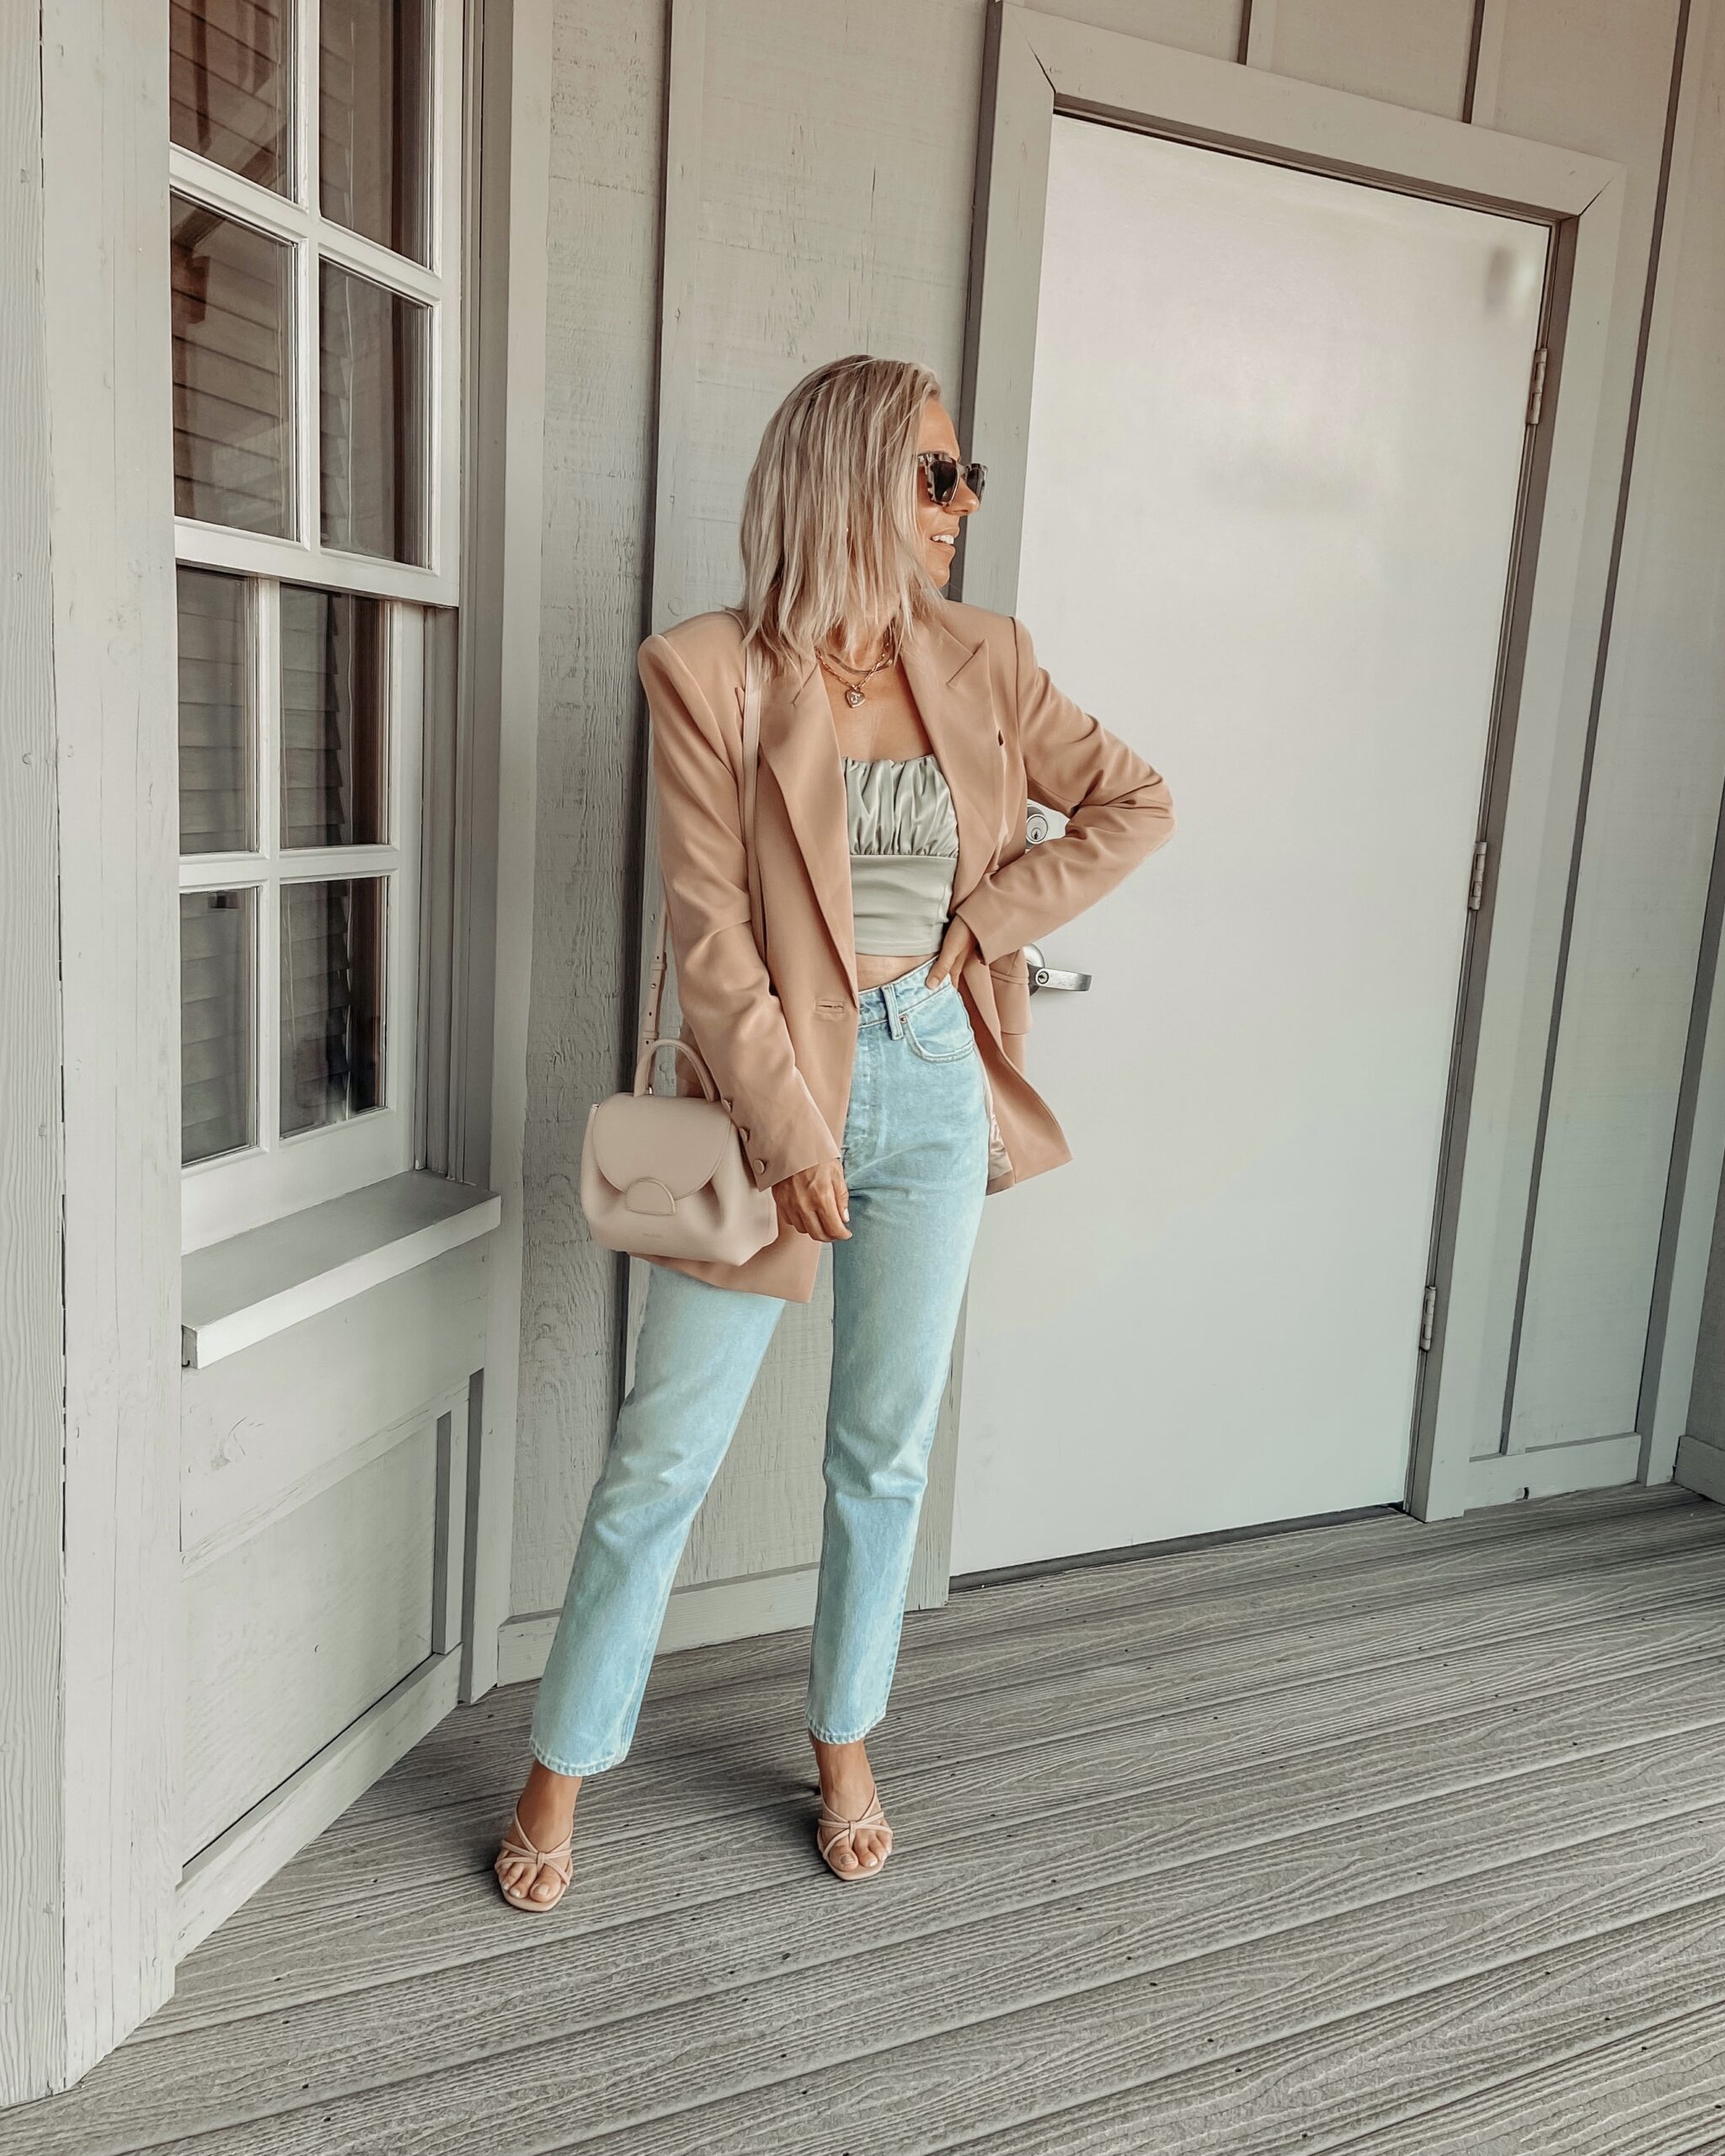 CHIC BLAZER STYLED 2 WAYS: Jaclyn De Leon Style- sharing a chic oversized blazer and two easy ways to style it. Paired with denim or a dress. Casual or dressed up. Fall outfit inspo